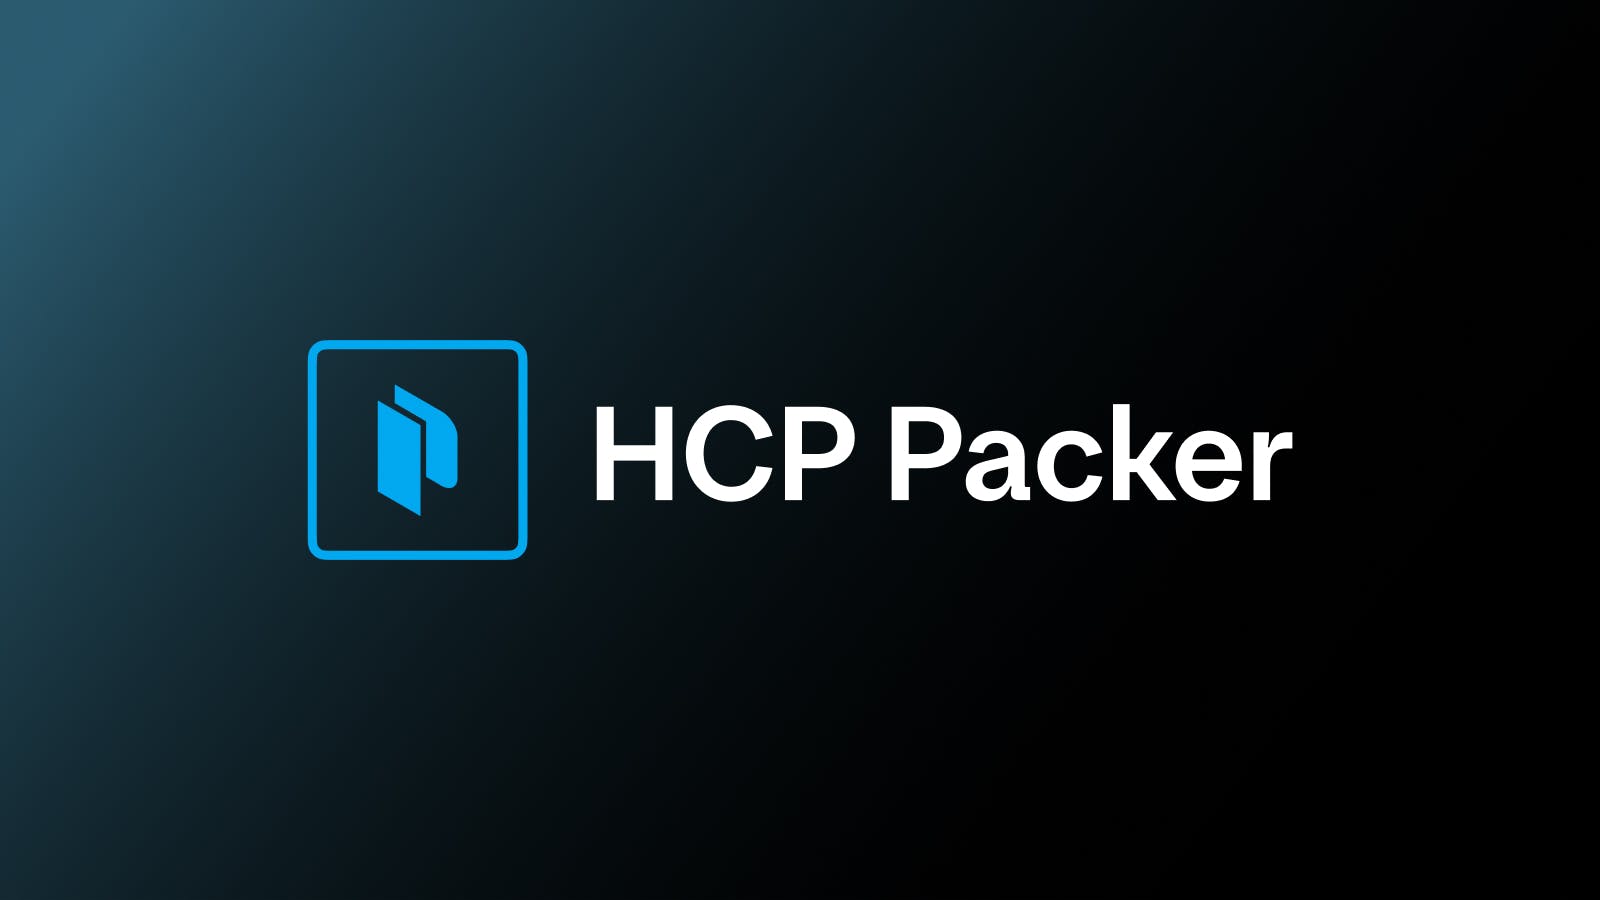 HCP Packer improves usage visibility with audit logs